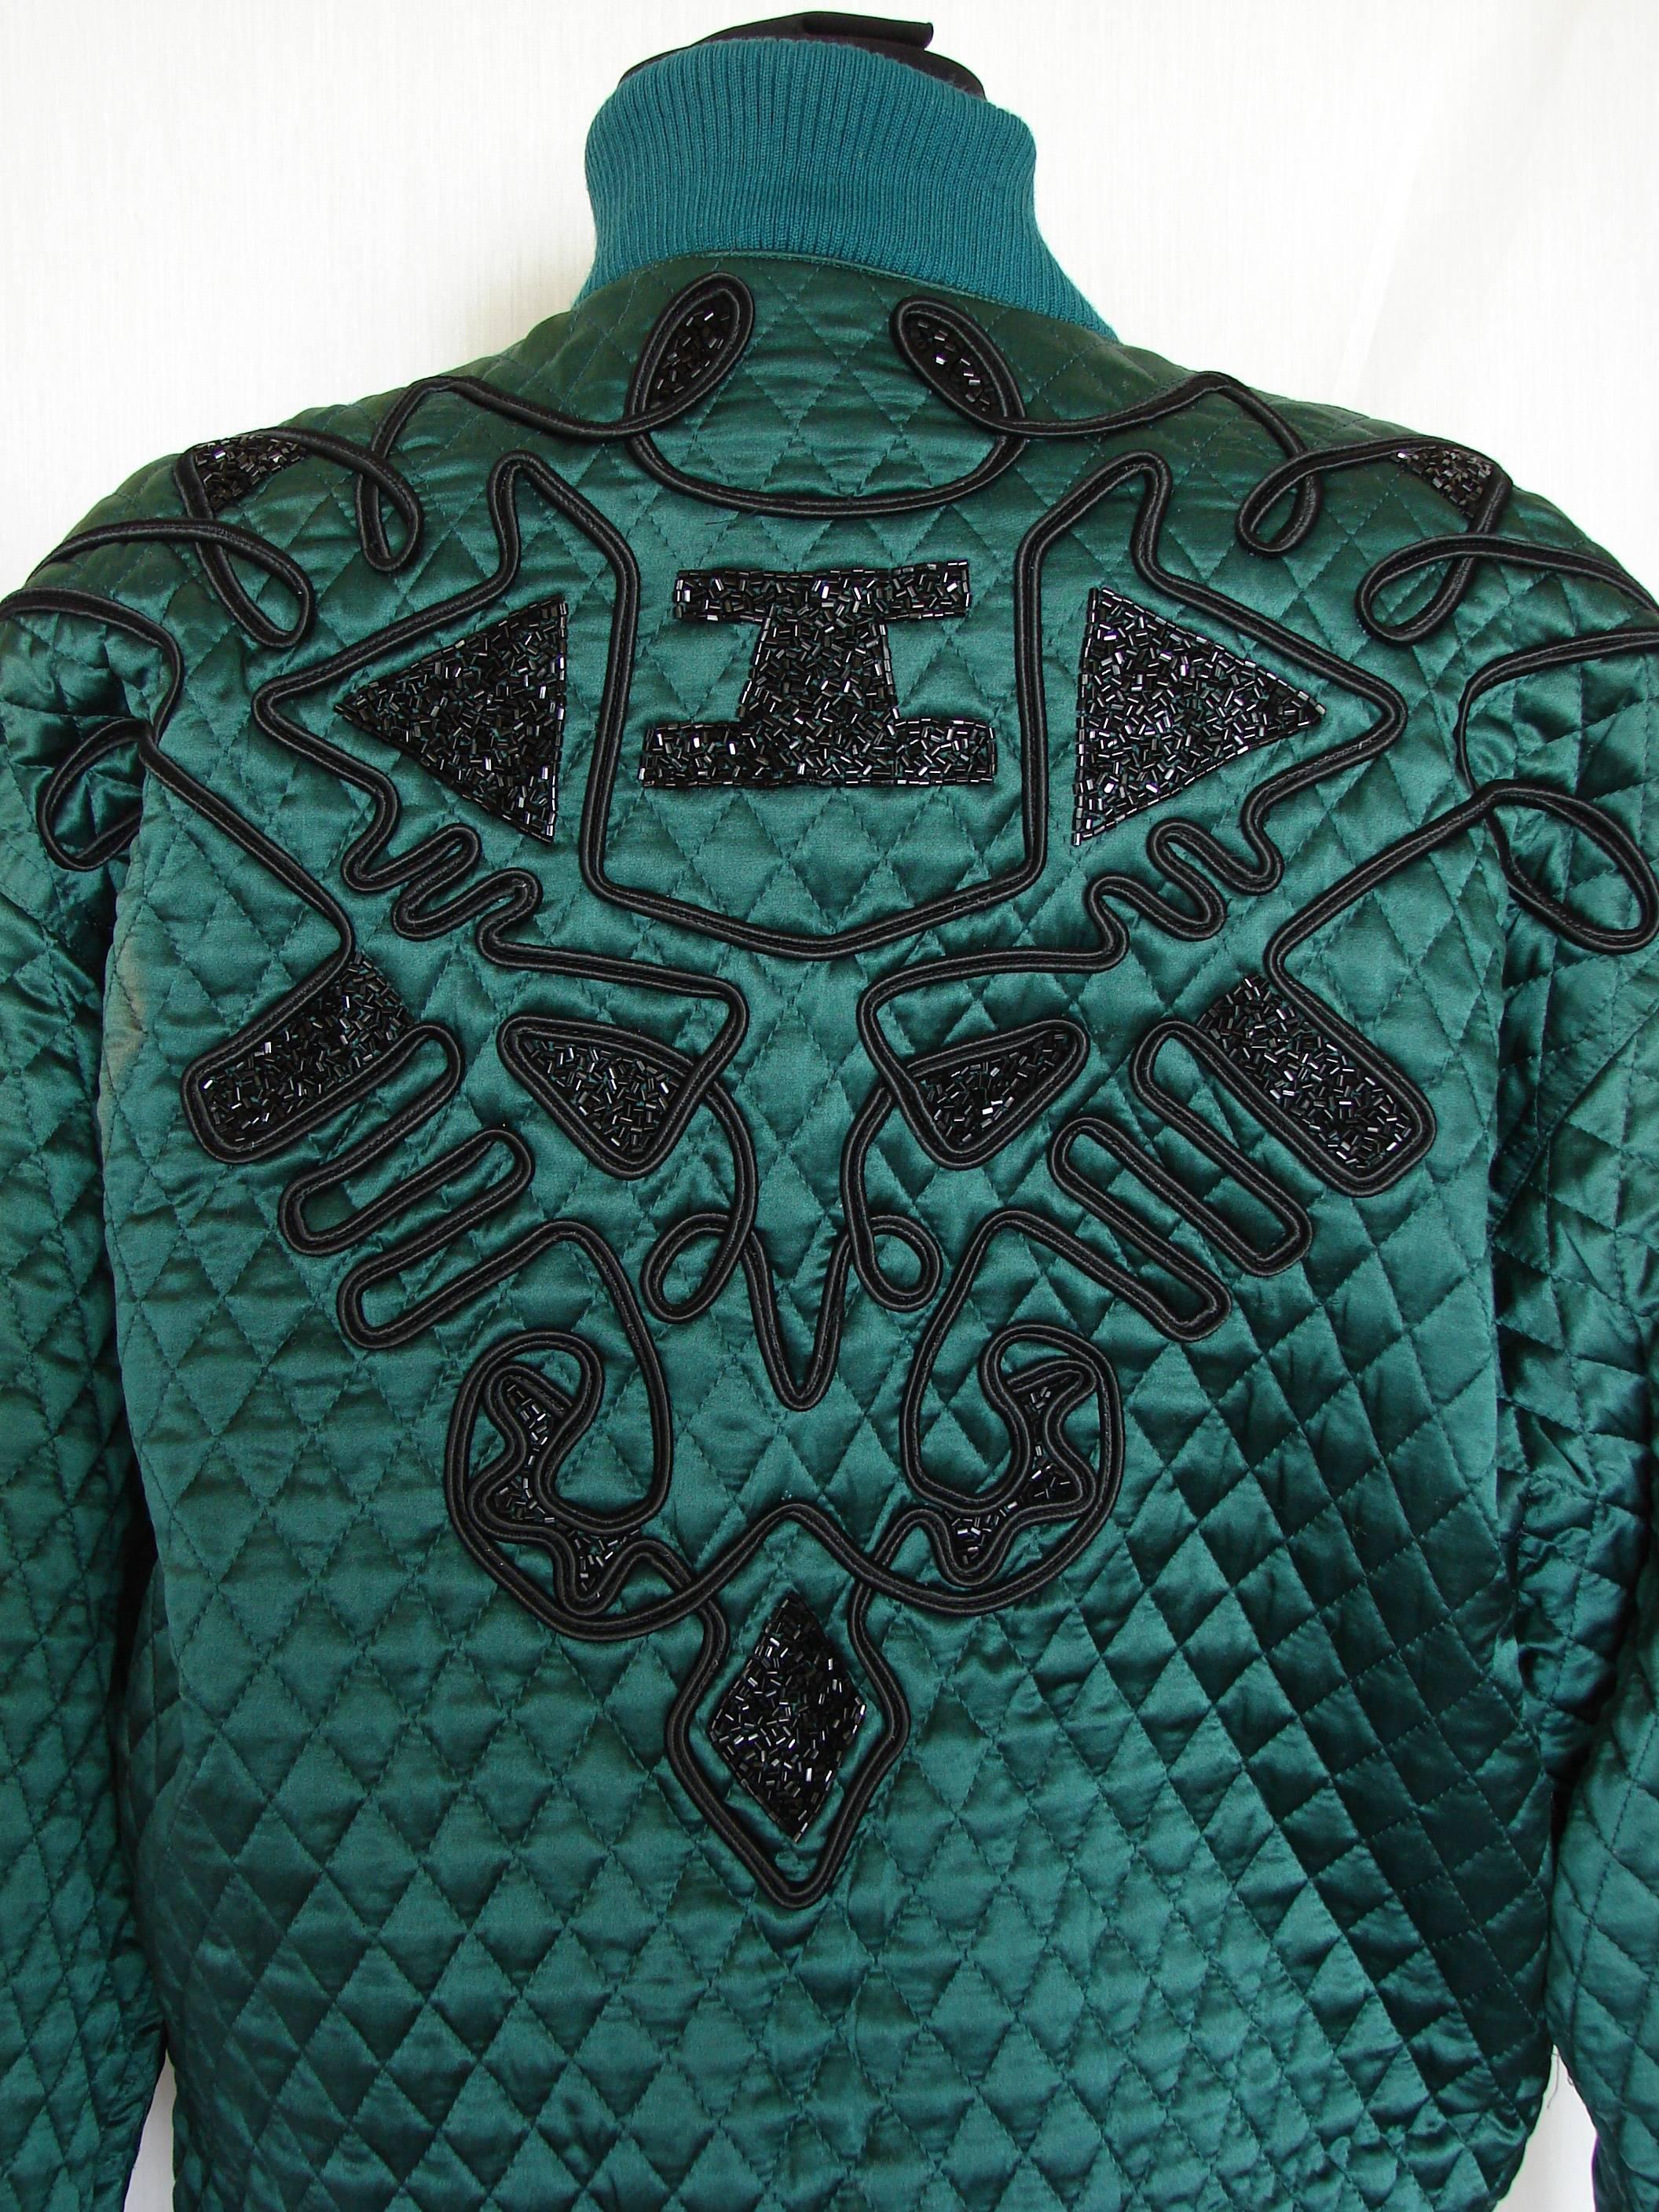 Kansai Yamamoto O2 Green Quilted Silk Jacket with Black Jet Bead Designs 1980s M 3